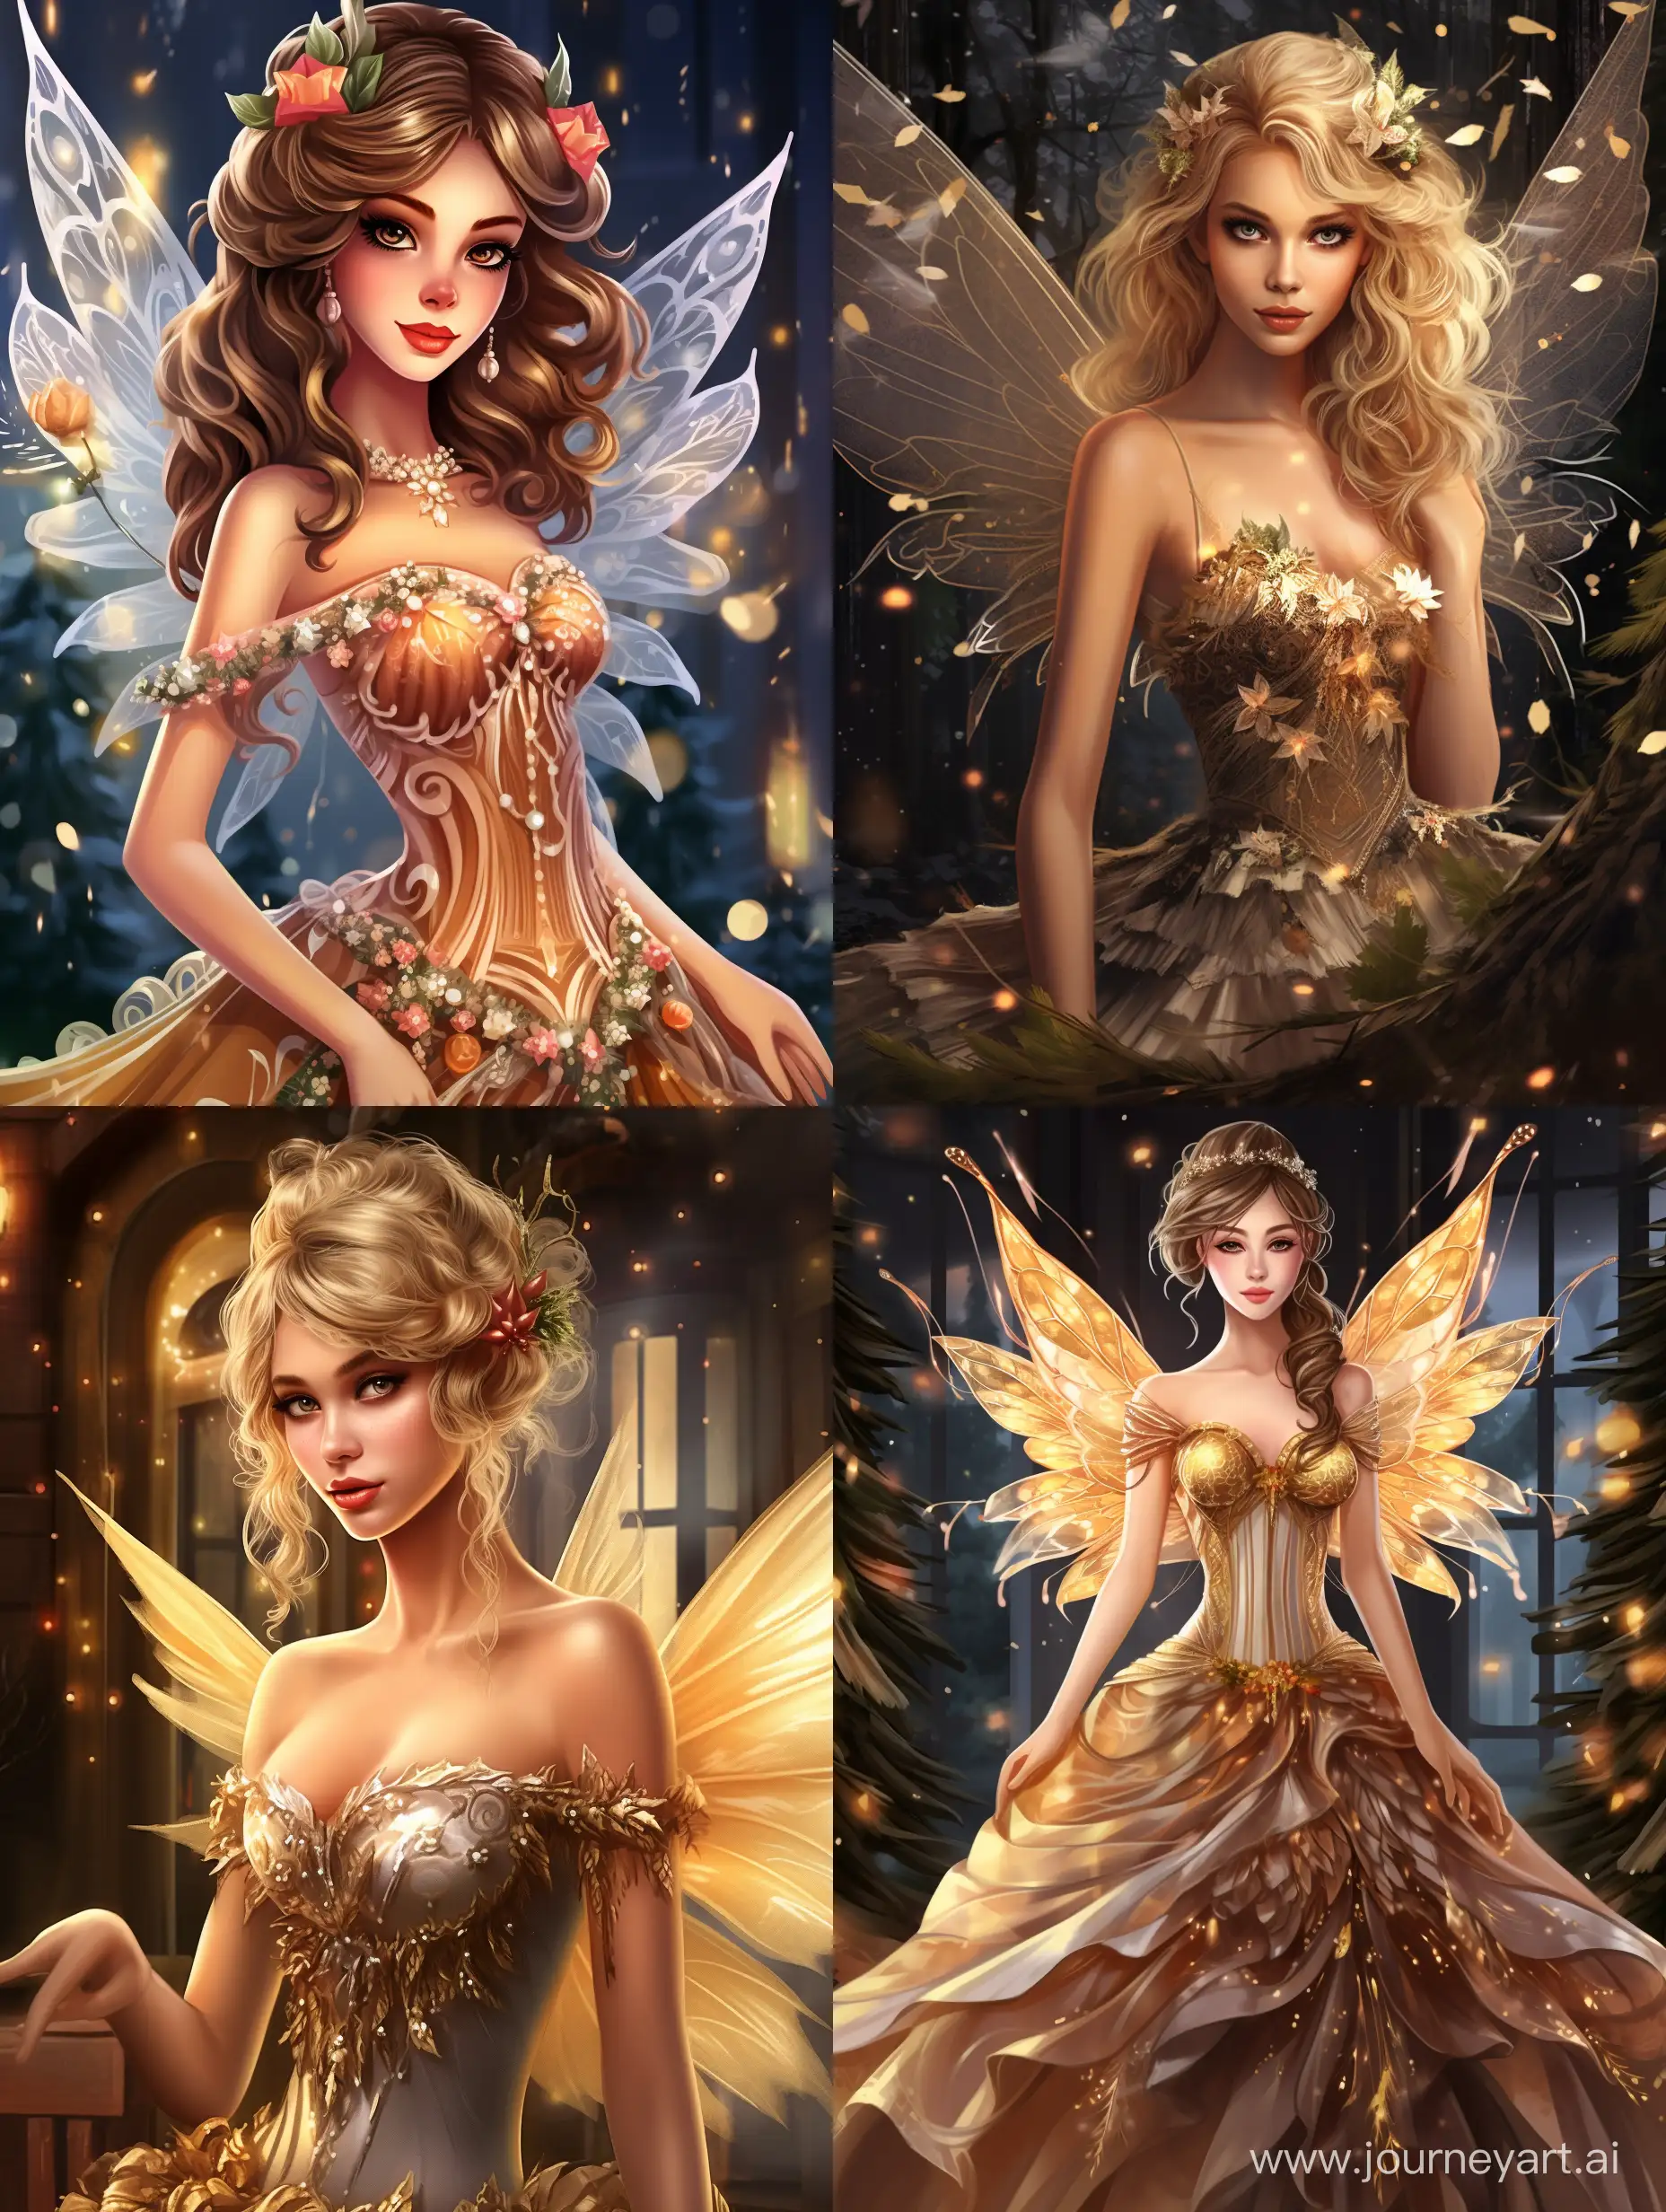 Christmas fairy with a cute and beautiful face, half smile, and a perfect body, wearing designer clothing in a Christmas-inspired fashion, The fairy should have a fantasy look and be surrounded by a celebration atmosphere with a Christmas tree adorned with ornaments, The scene should be illuminated by the warm glow of candlelight, The artwork should be an oil painting with high quality and attention to detail